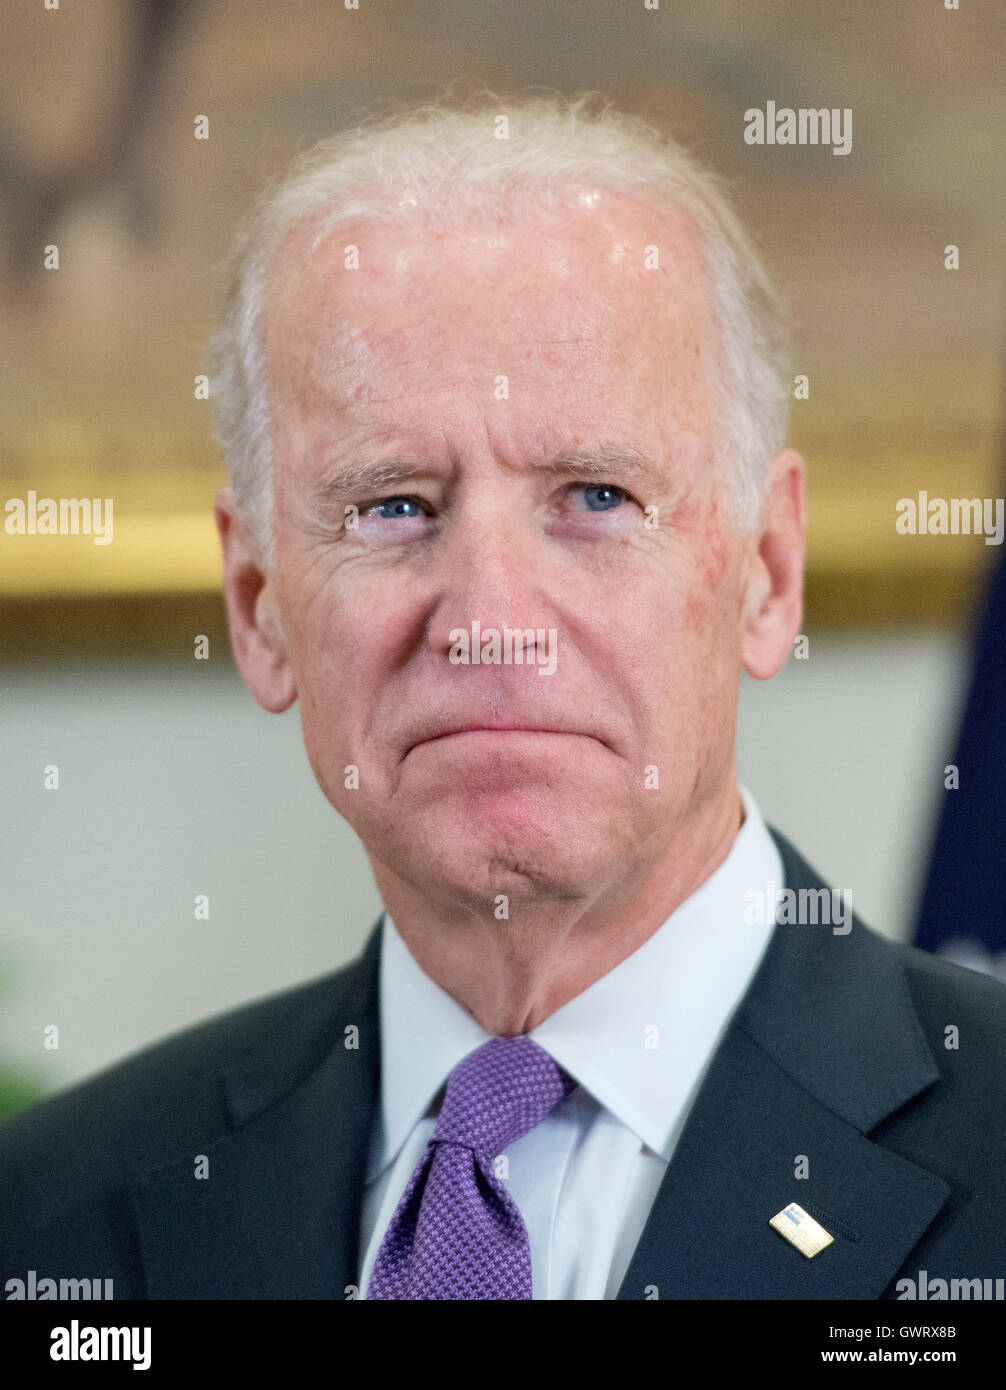 United States Vice President Joe Biden looks on as US President Barack Obama announces he will keep 5,500 US troops in Afghanistan when he leaves office in 2017 and explains his reasoning for that action in the Roosevelt Room of the White House in Washing Stock Photo